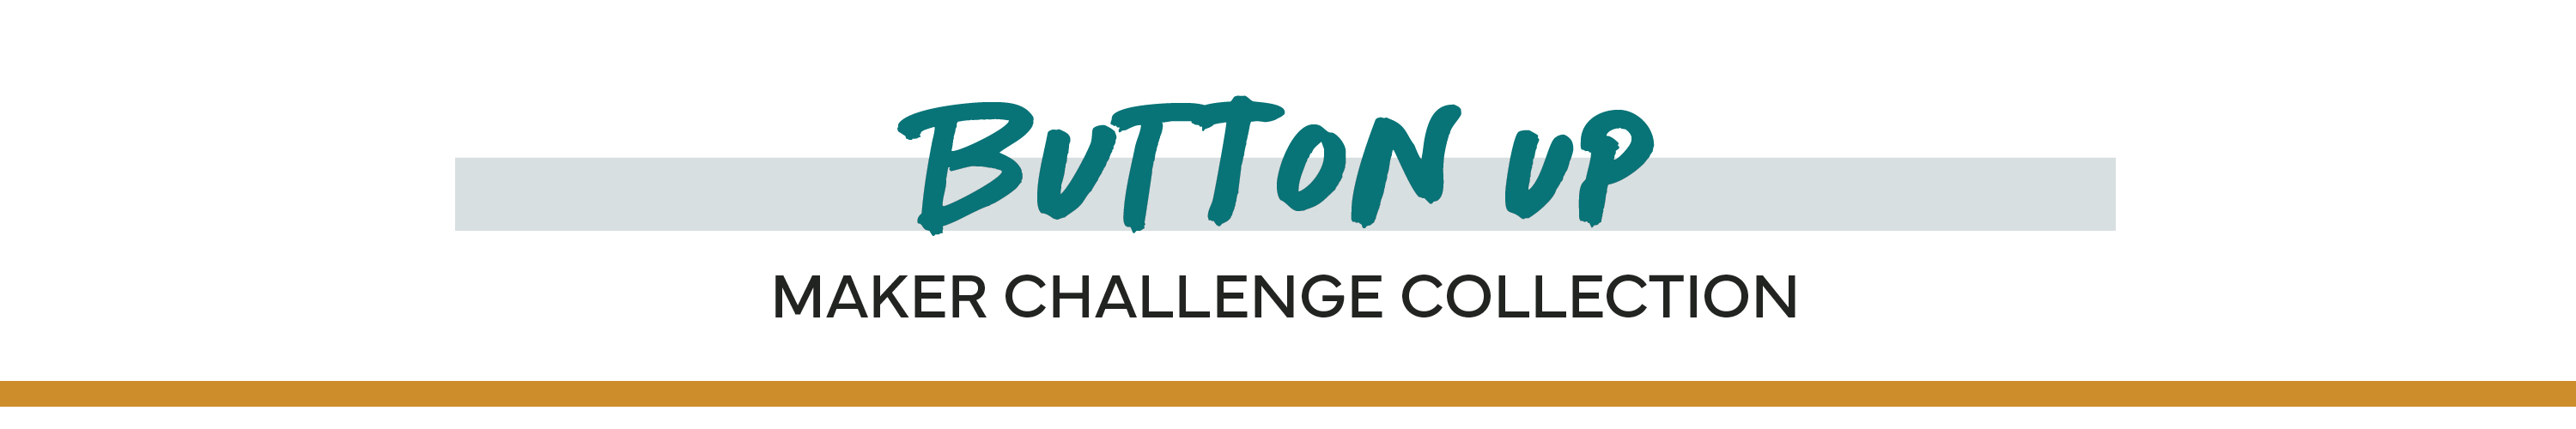 Maker Challenge Collection Button Up